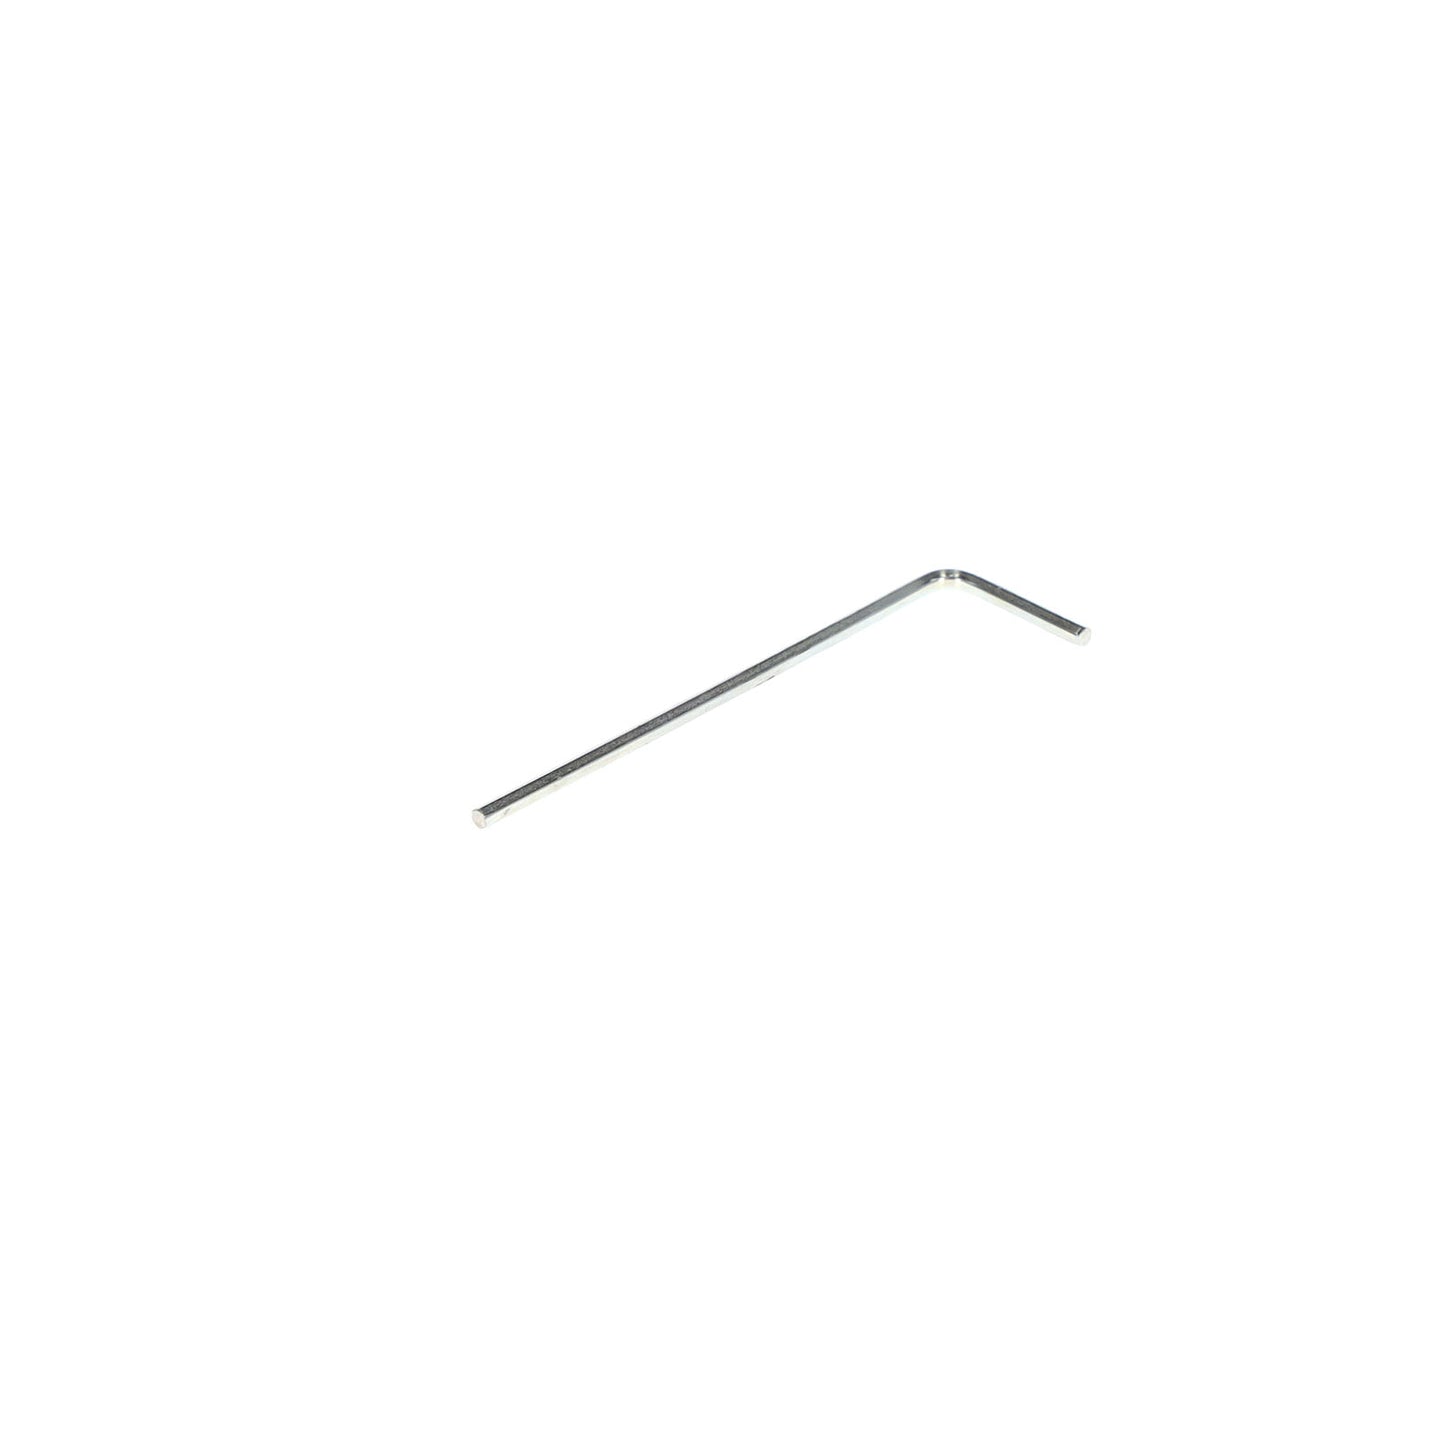 GEDORE 42 1.3 - Angled Allen Key 1.3 mm (6342470)